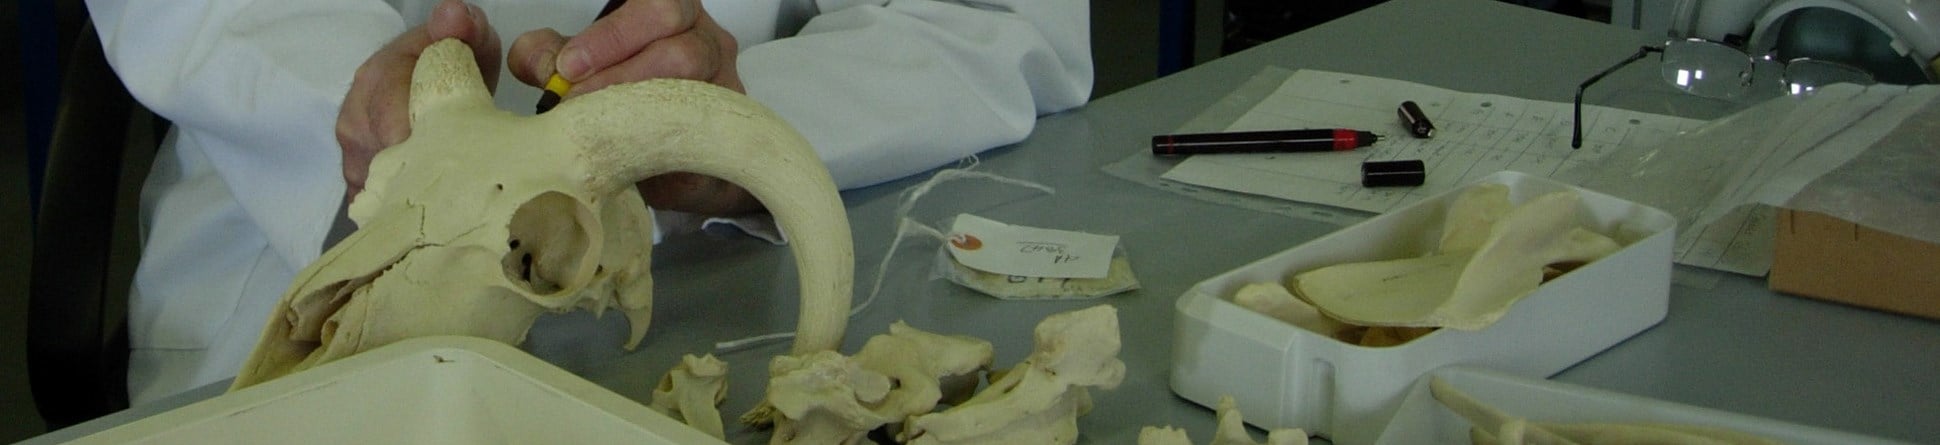 Photograph of sheep bones in a laboratory